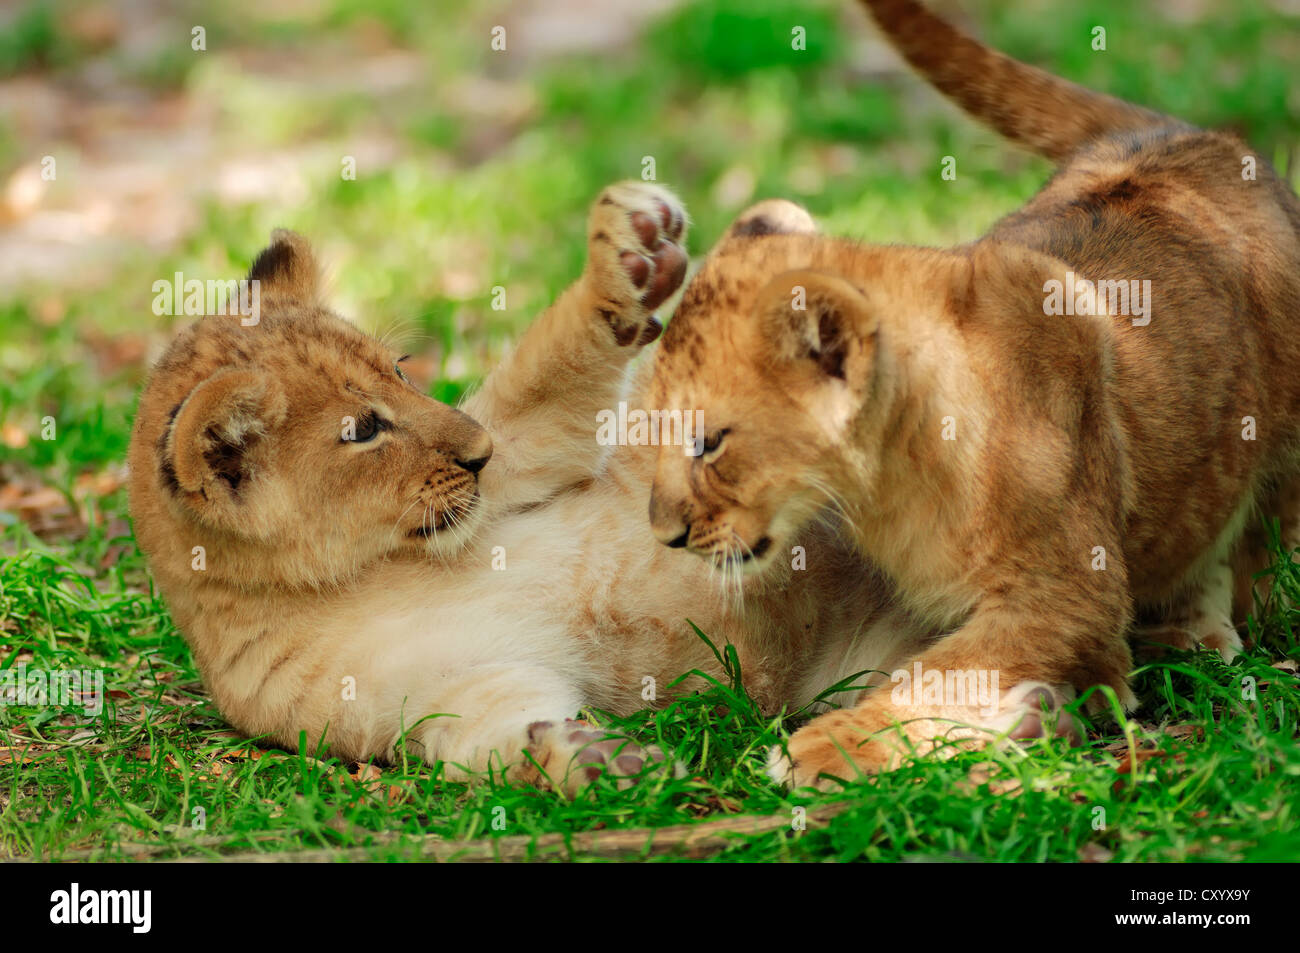 Lion (Panthera leo), two cubs playing, African species, captive, The Netherlands, Europe Stock Photo